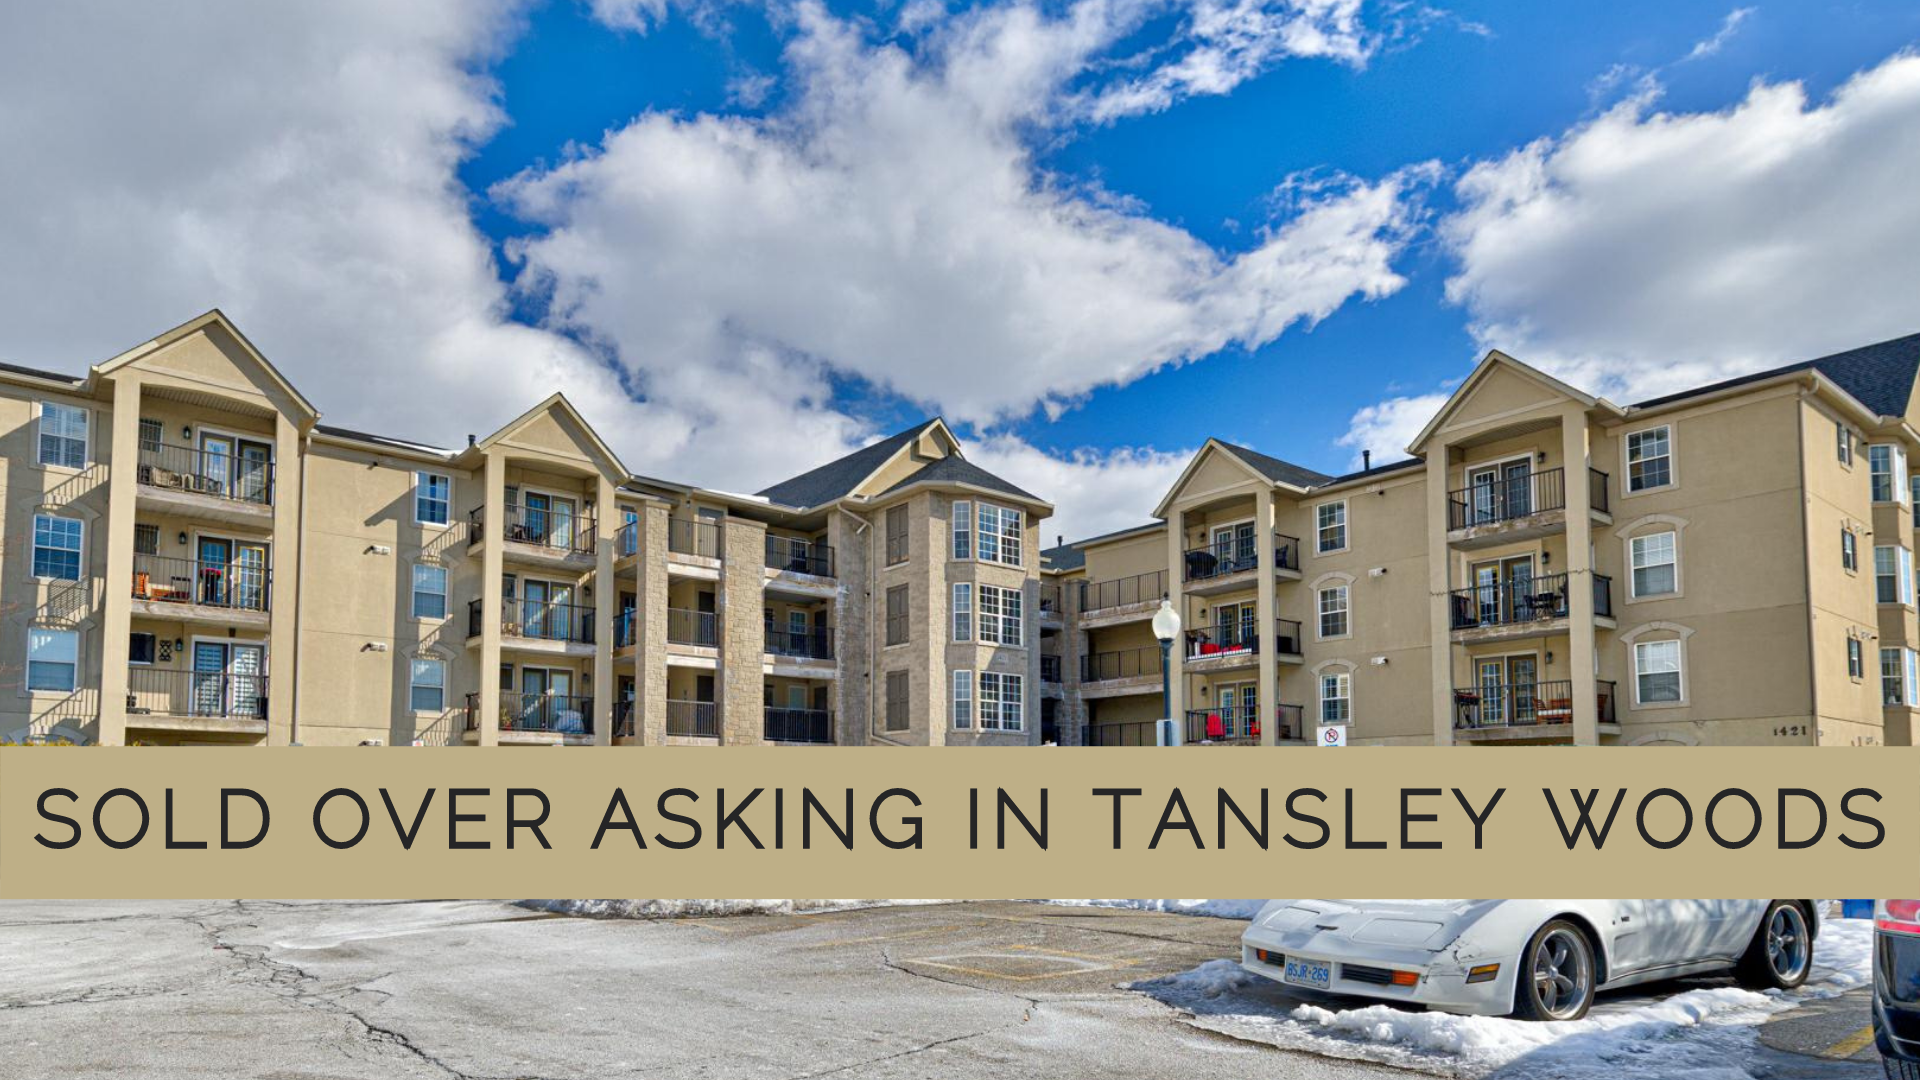 SOLD OVER ASKING TANSLEY